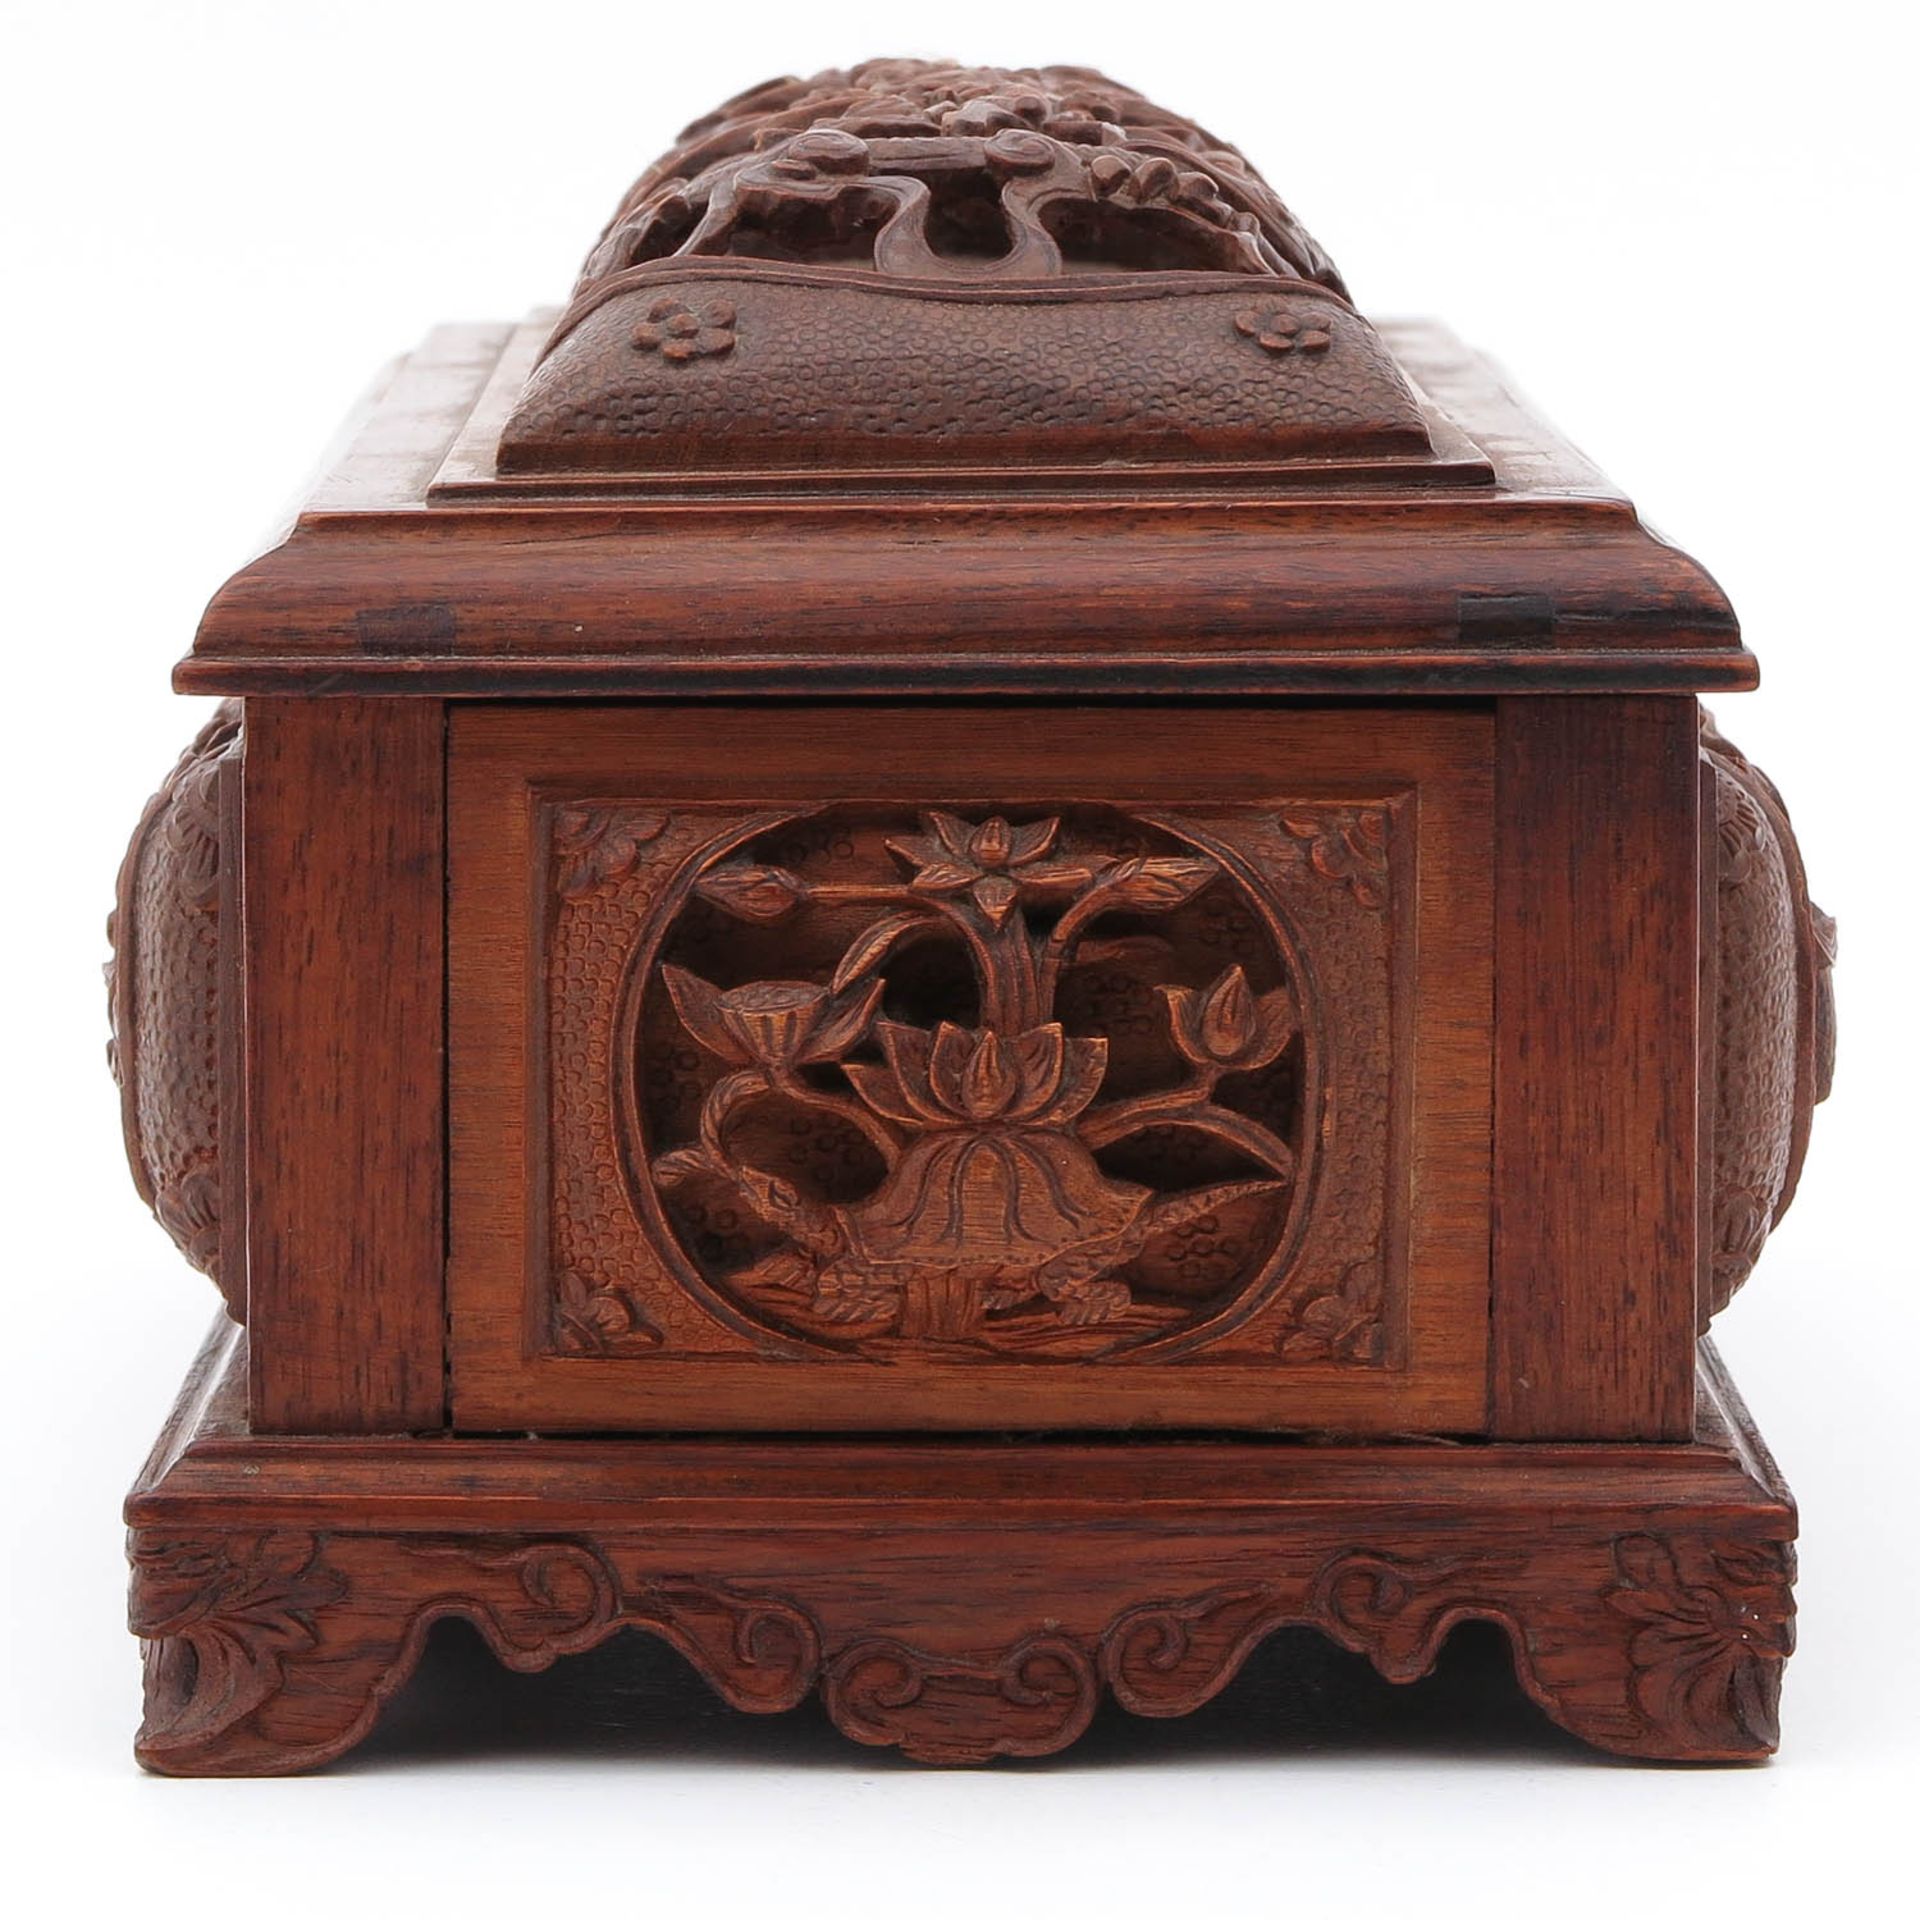 A Carved Wood Box - Image 4 of 10